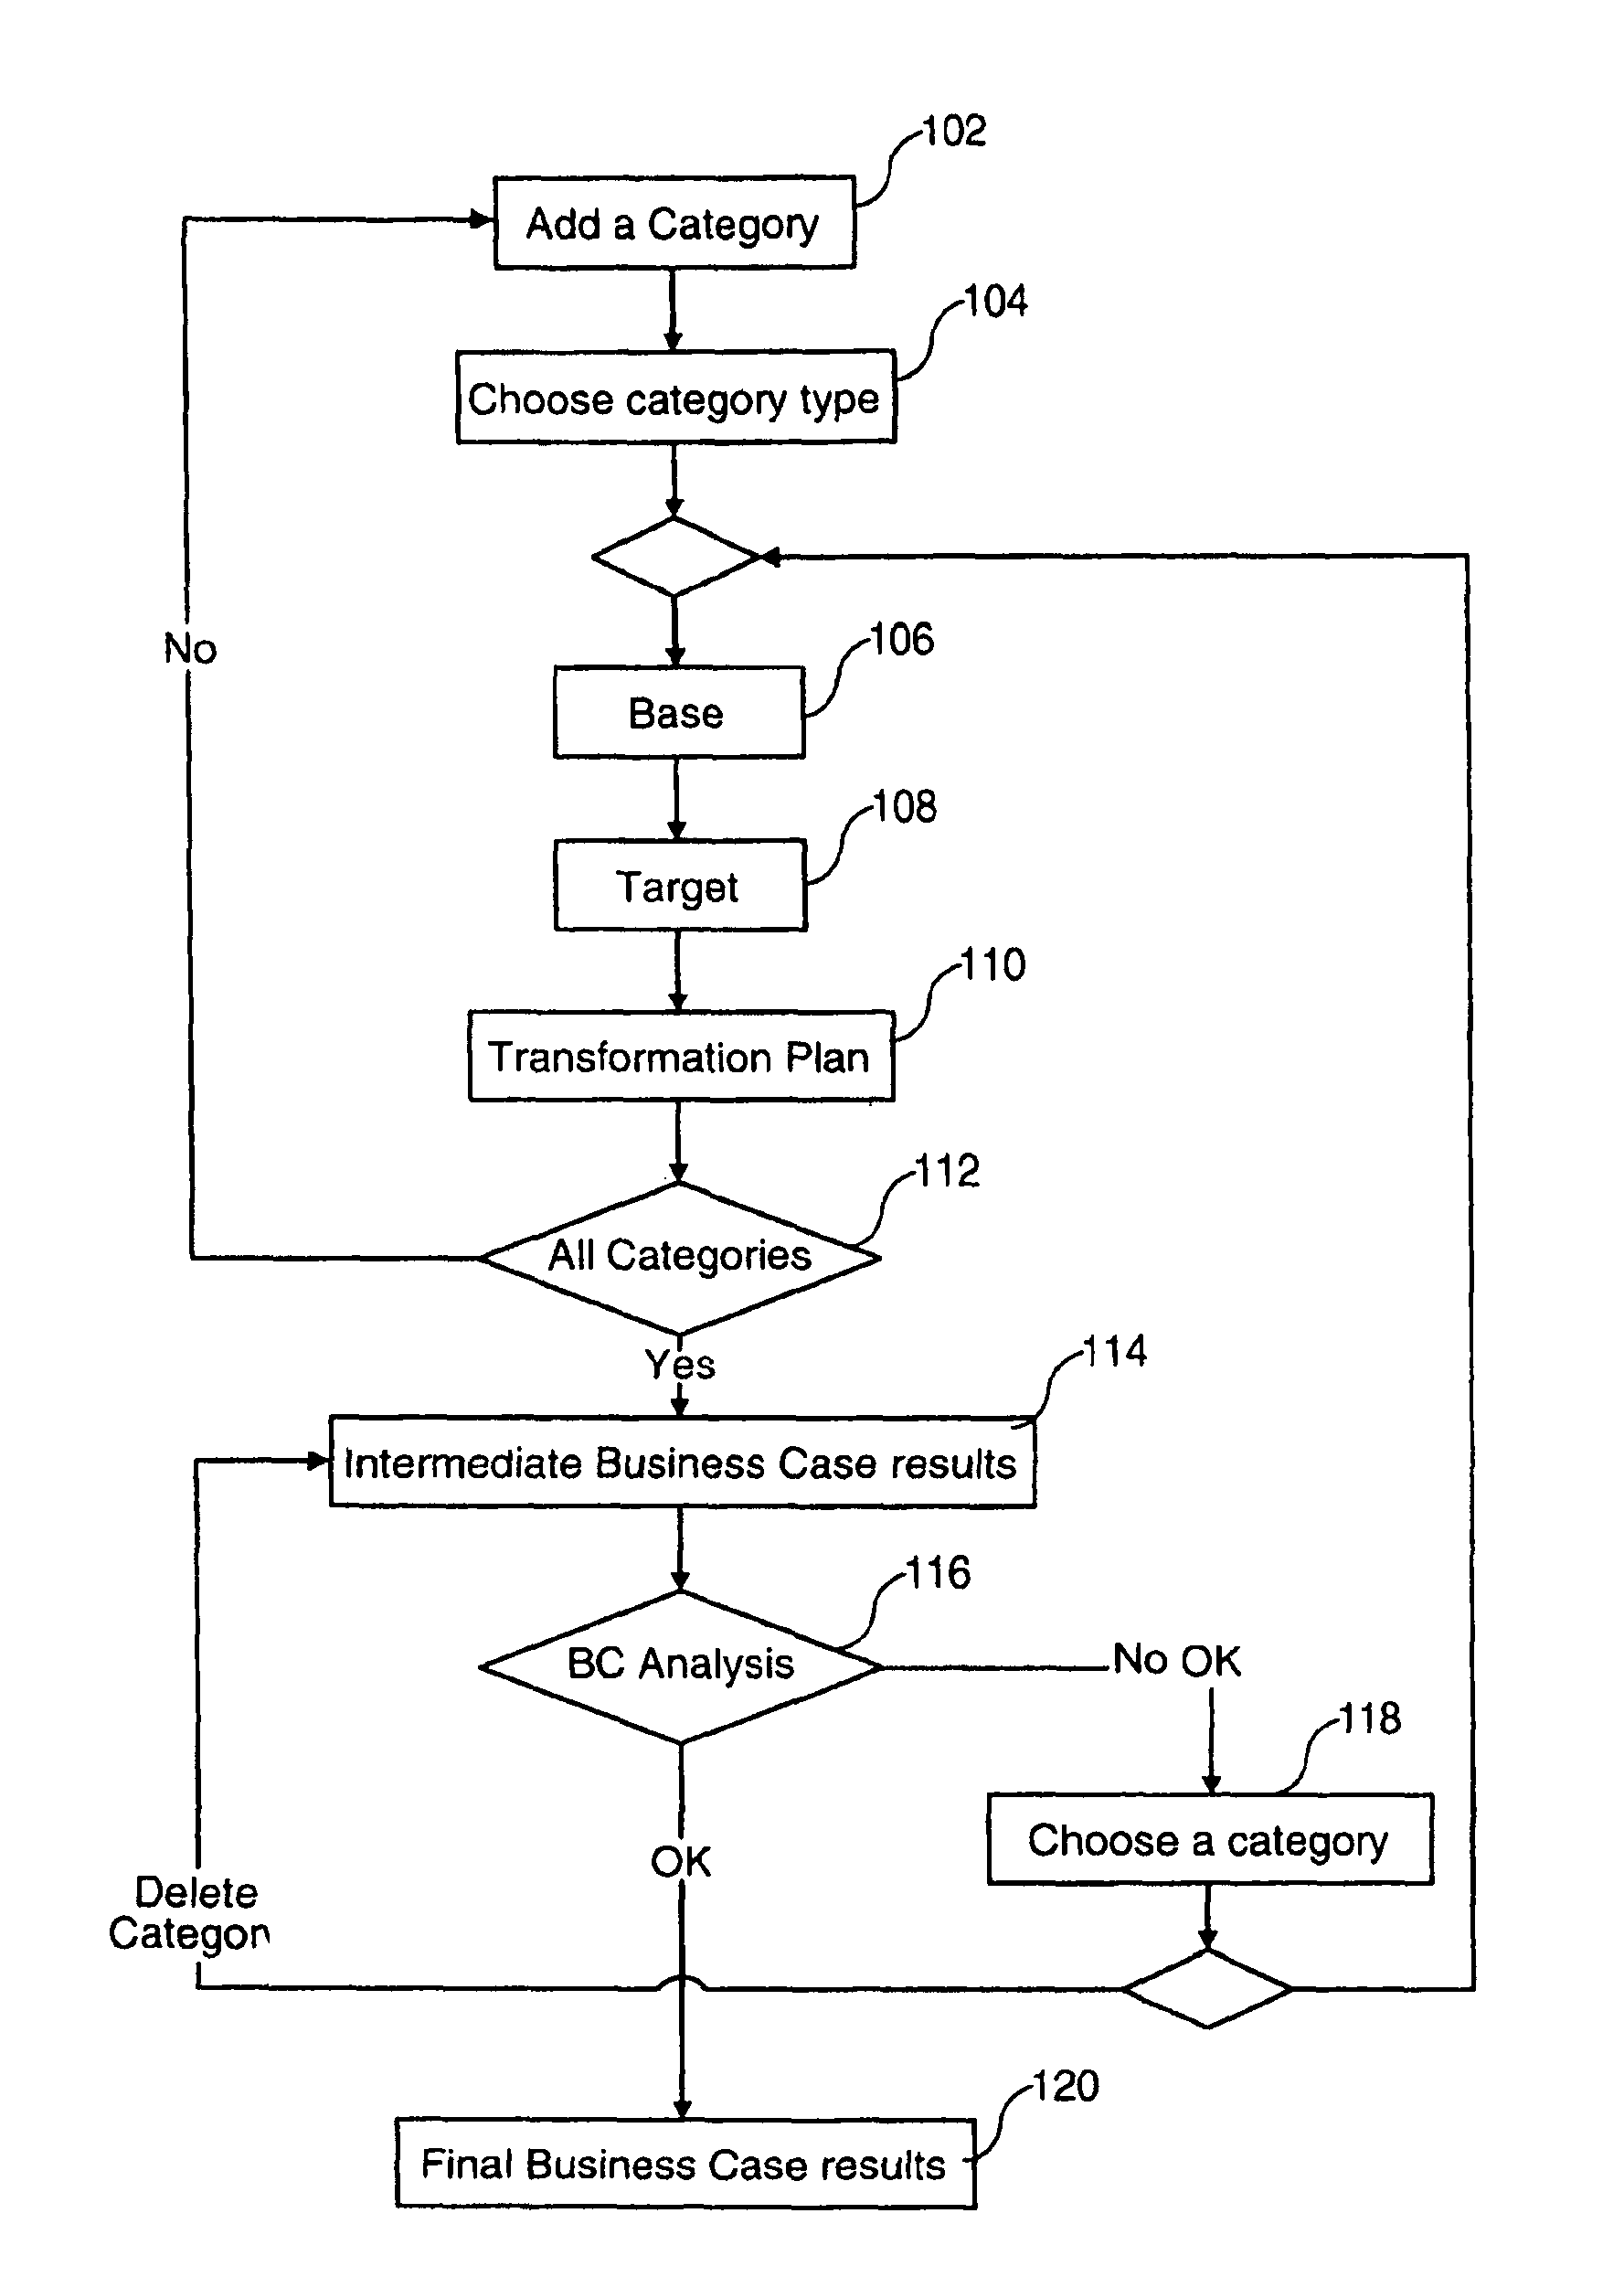 System and method of generating business case models